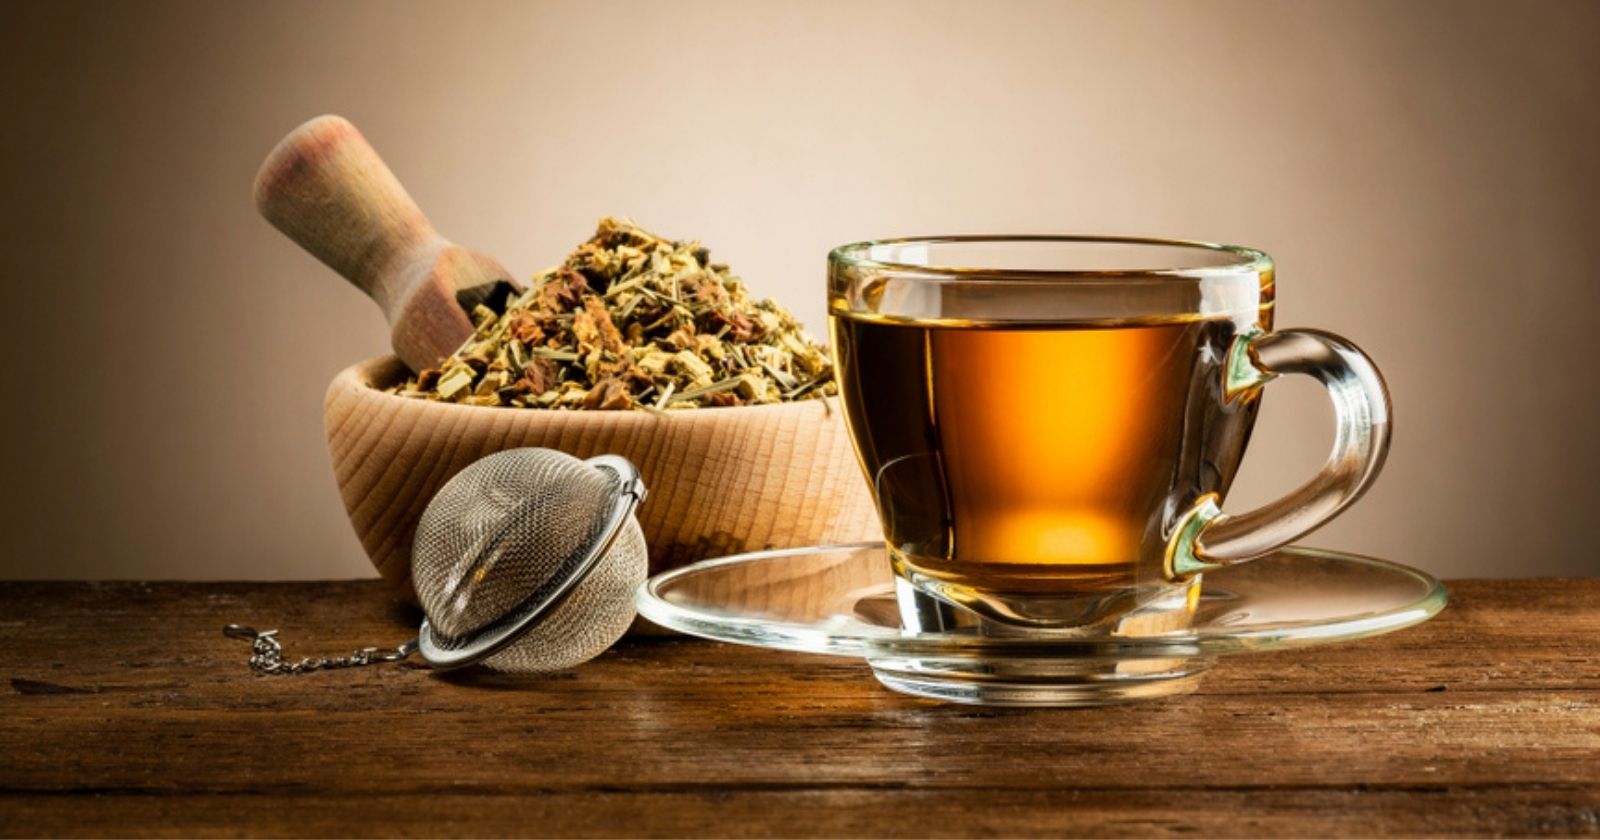 Stainless steel ball, silicone or cloth filter: which tea infuser to choose?